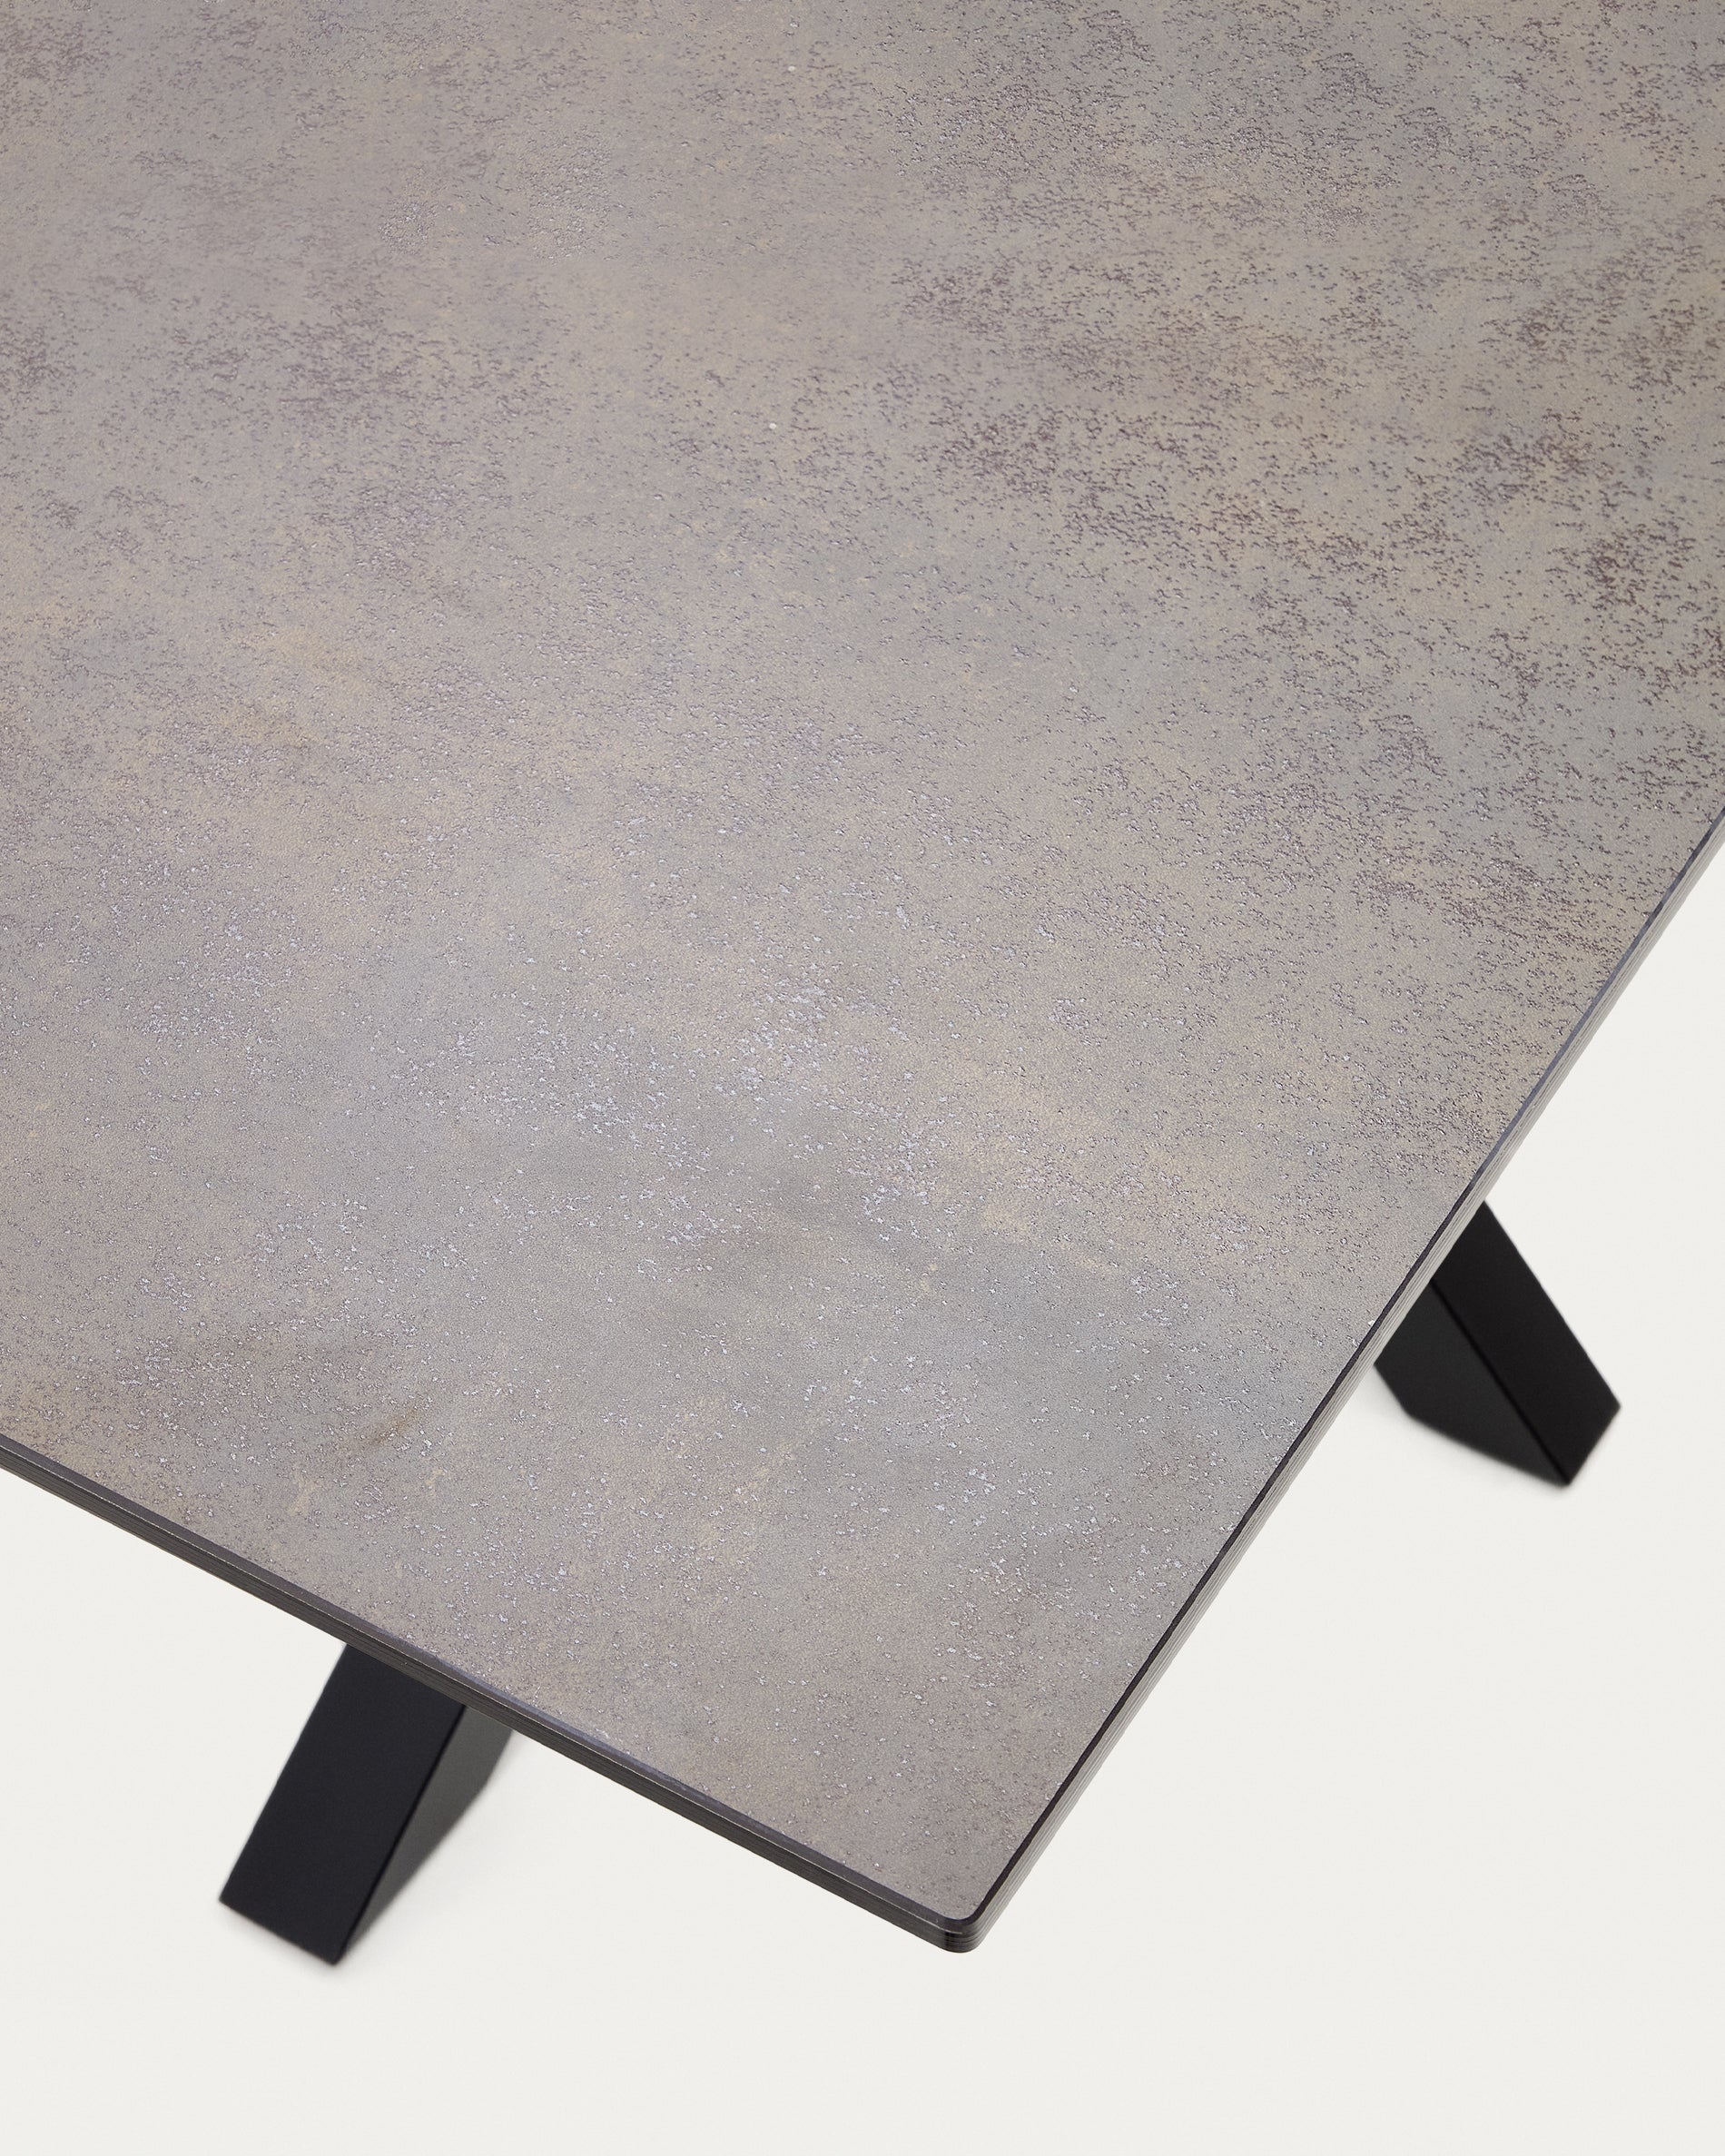 Argo table in Iron Moss porcelain and steel legs with black finish, 180 x 100 cm